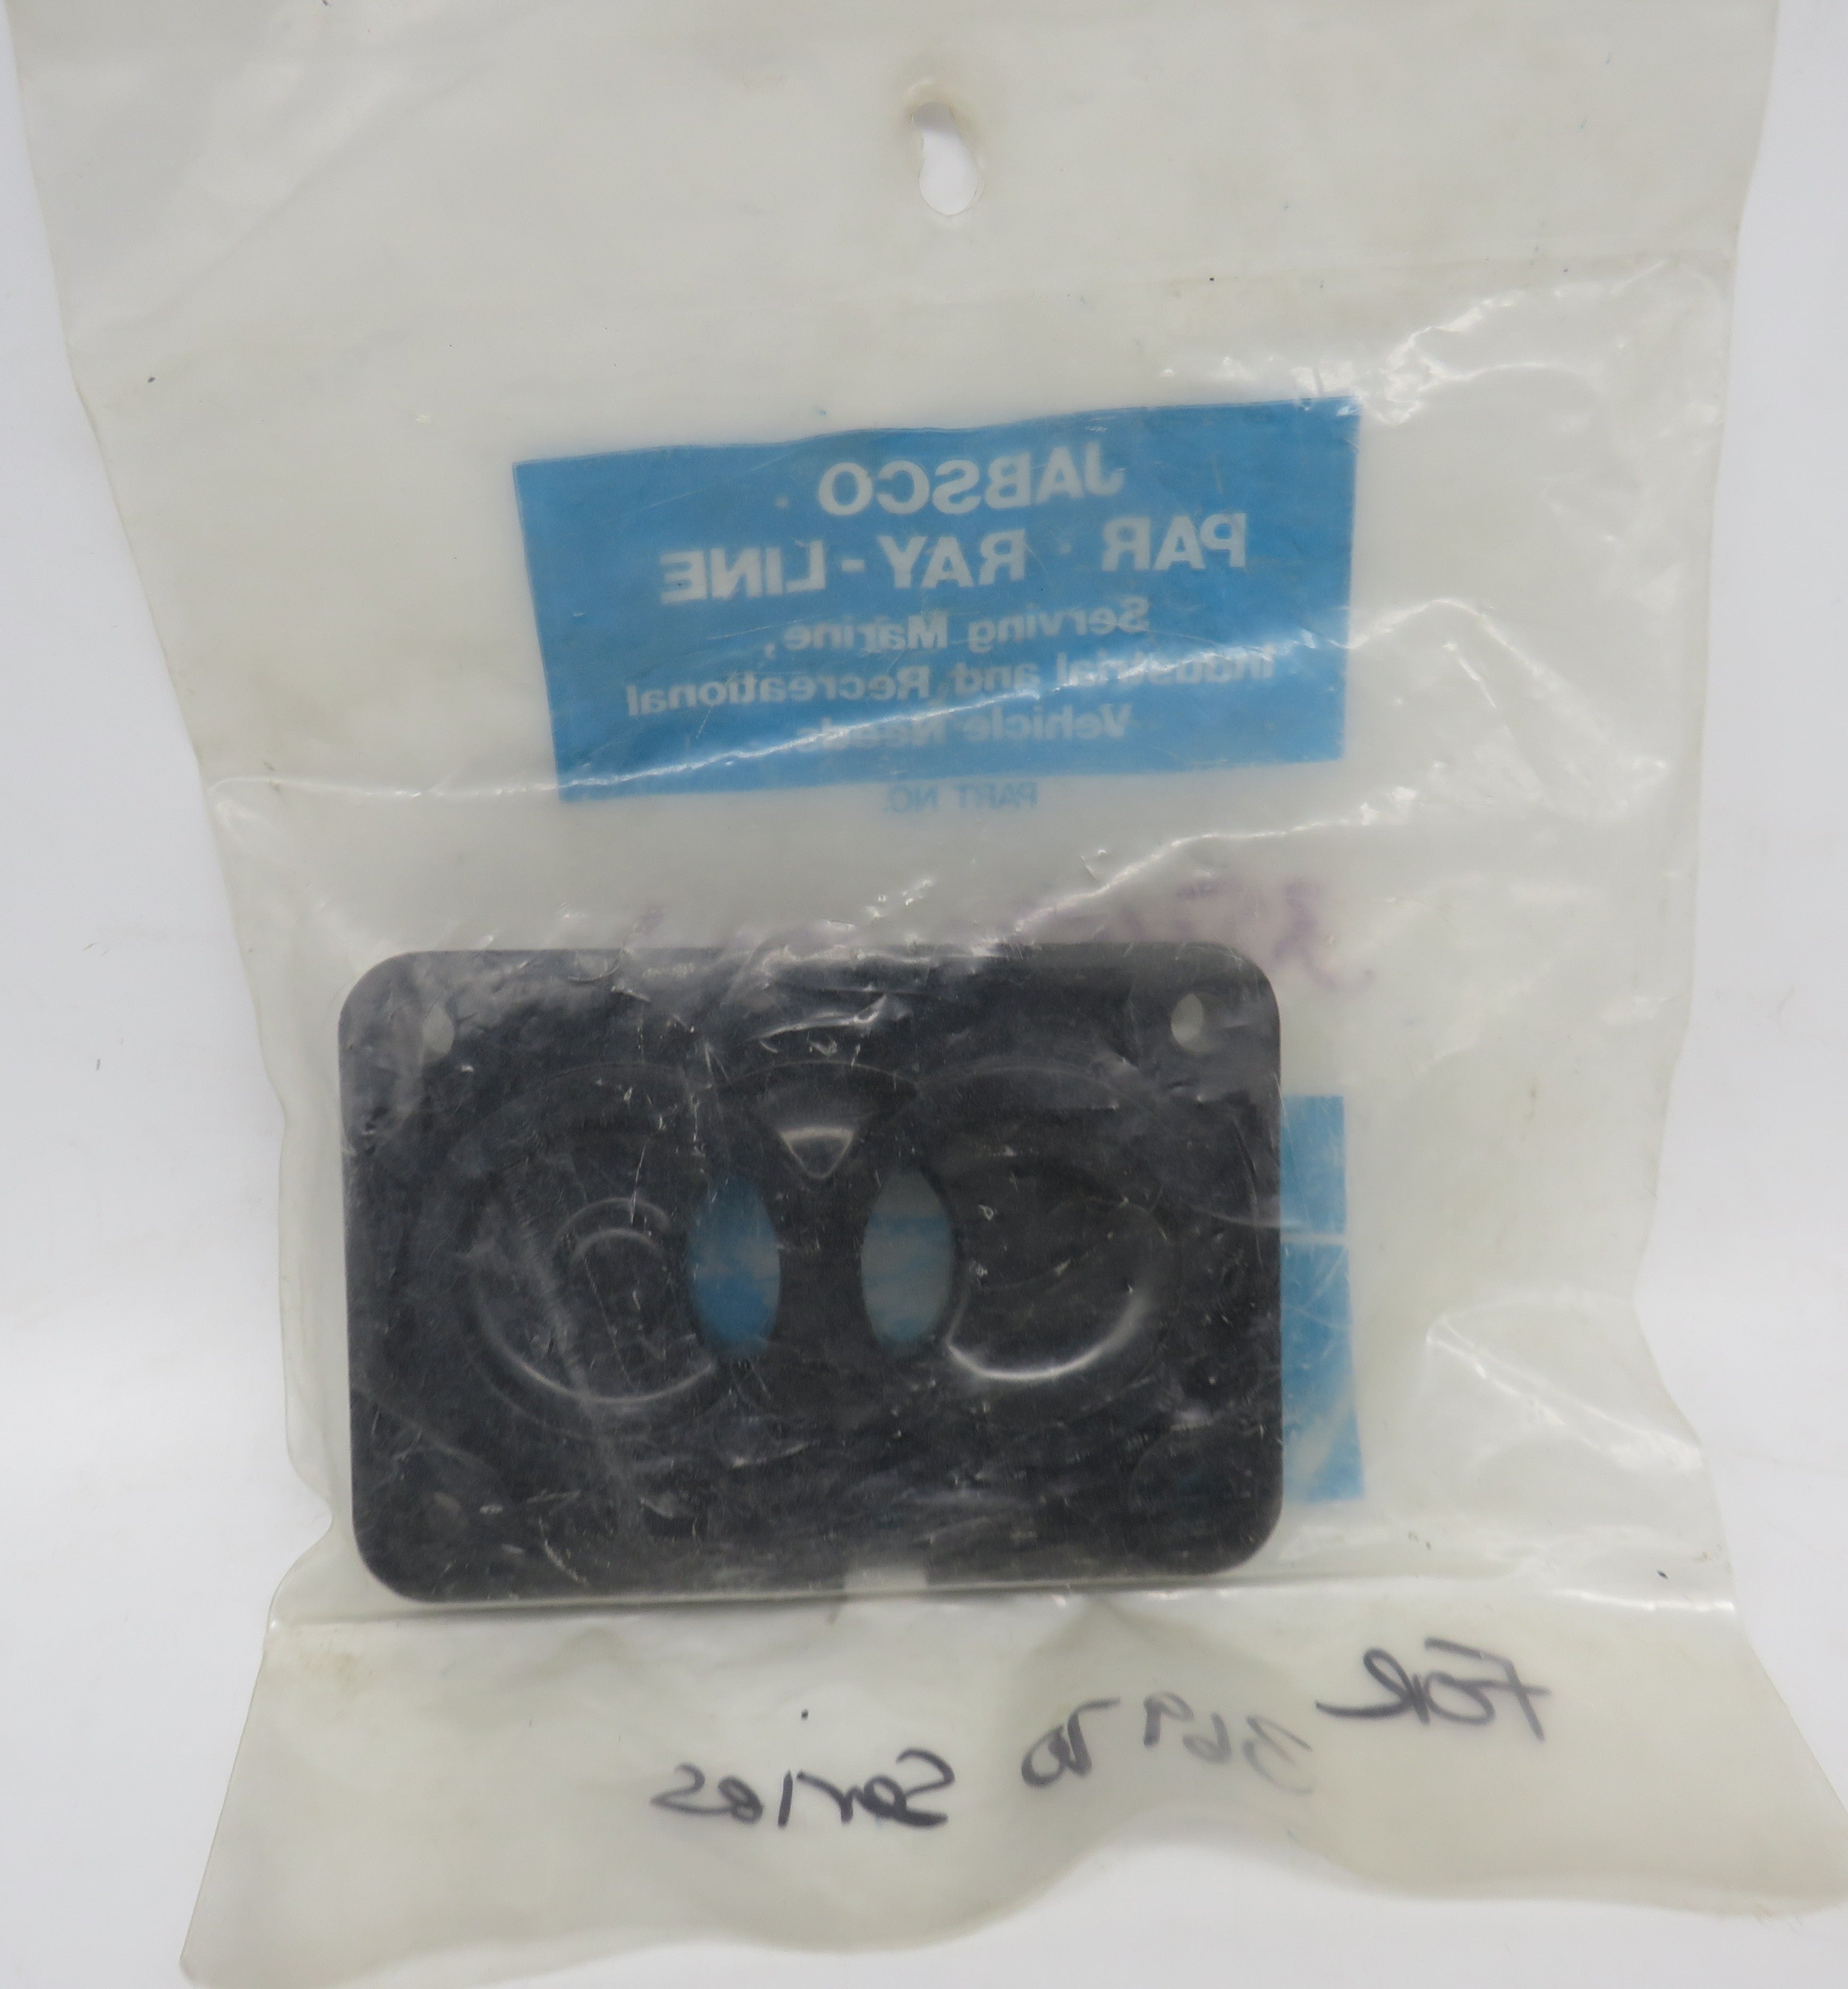 35454-0000 Jabsco Pump Retainer Cover for 3697 O Pumps (Obsolete) for 36970 Series